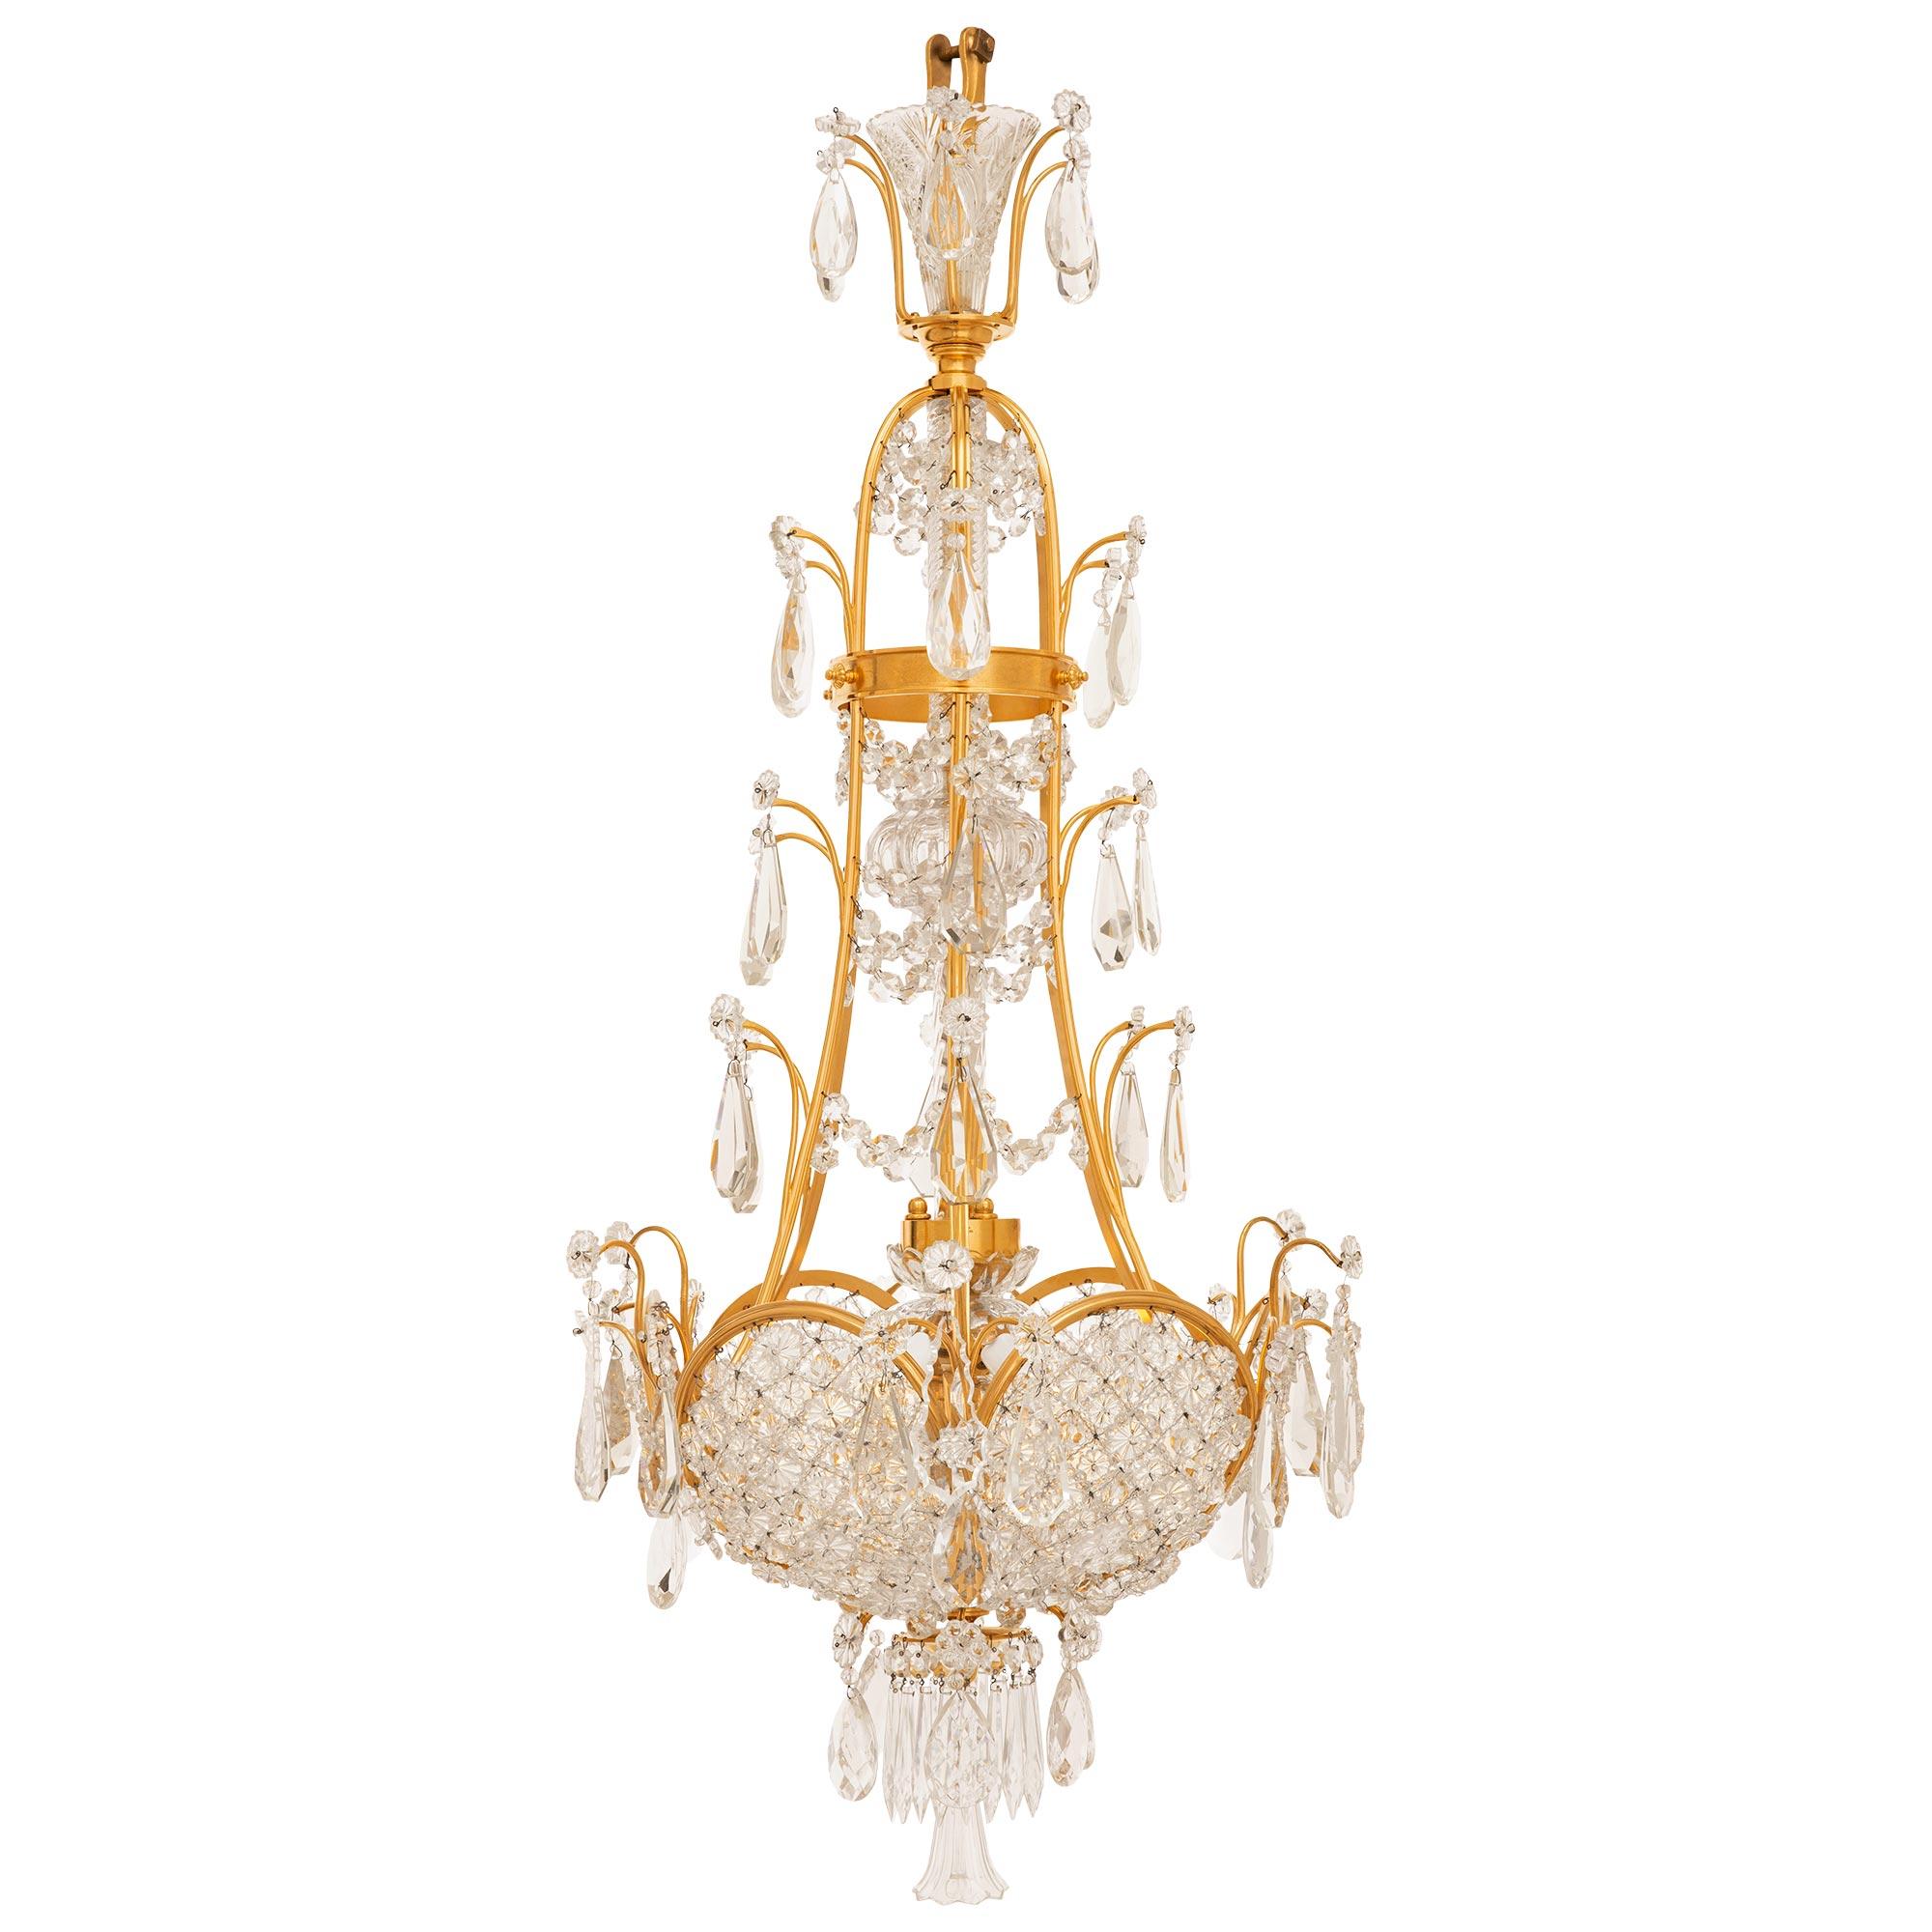 An exceptional and high quality French 19th century Neo-Classical st. Ormolu, Crystal, and Glass chandelier. This wonderful six light chandelier is centered by an inverted tulip bulb bottom finial flanked by prism cut and tear drop cut Crystal